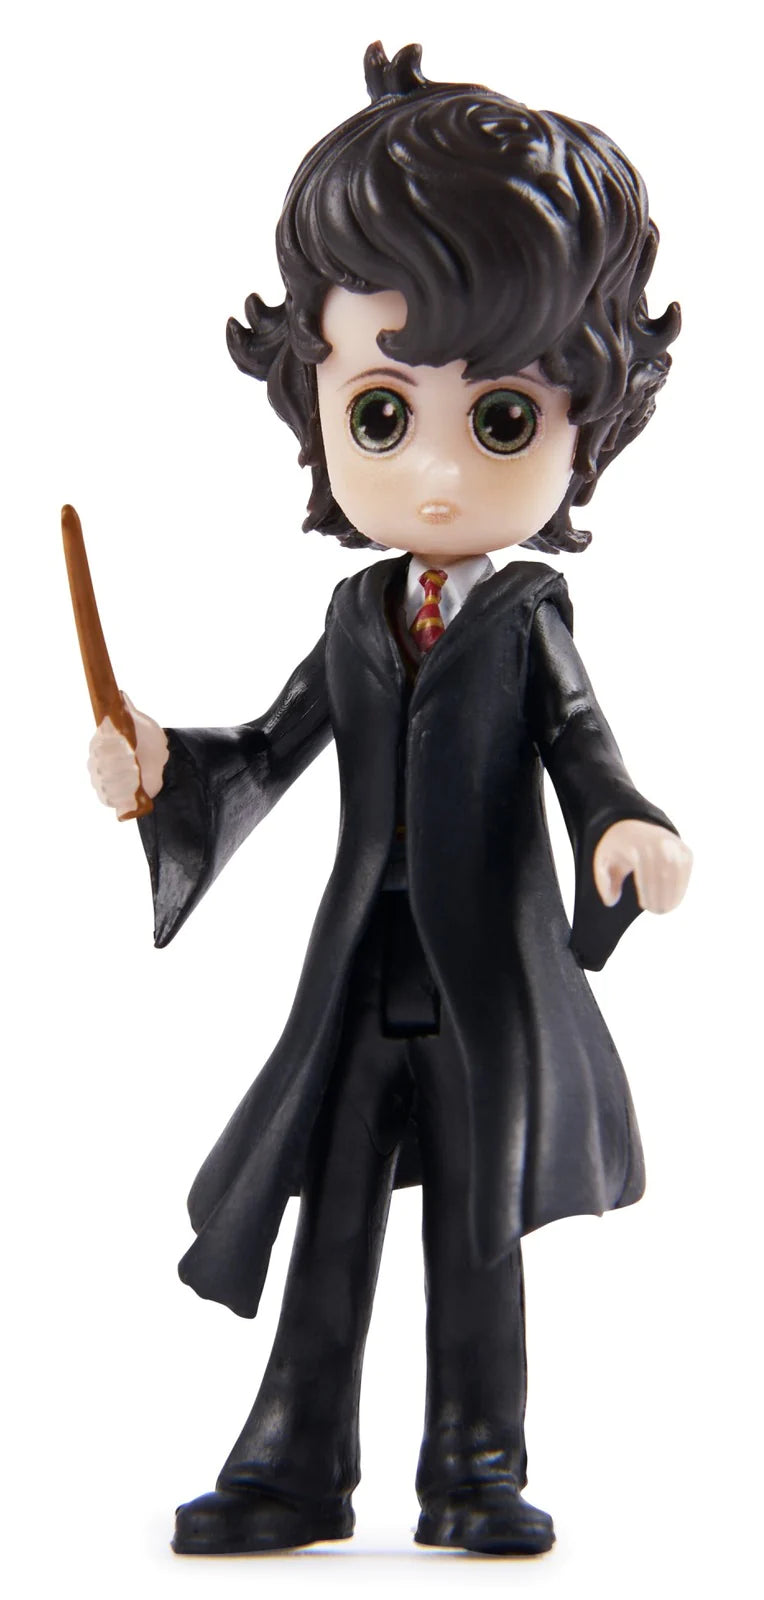 Harry Potter Doll Figures Wizarding World Various Characters